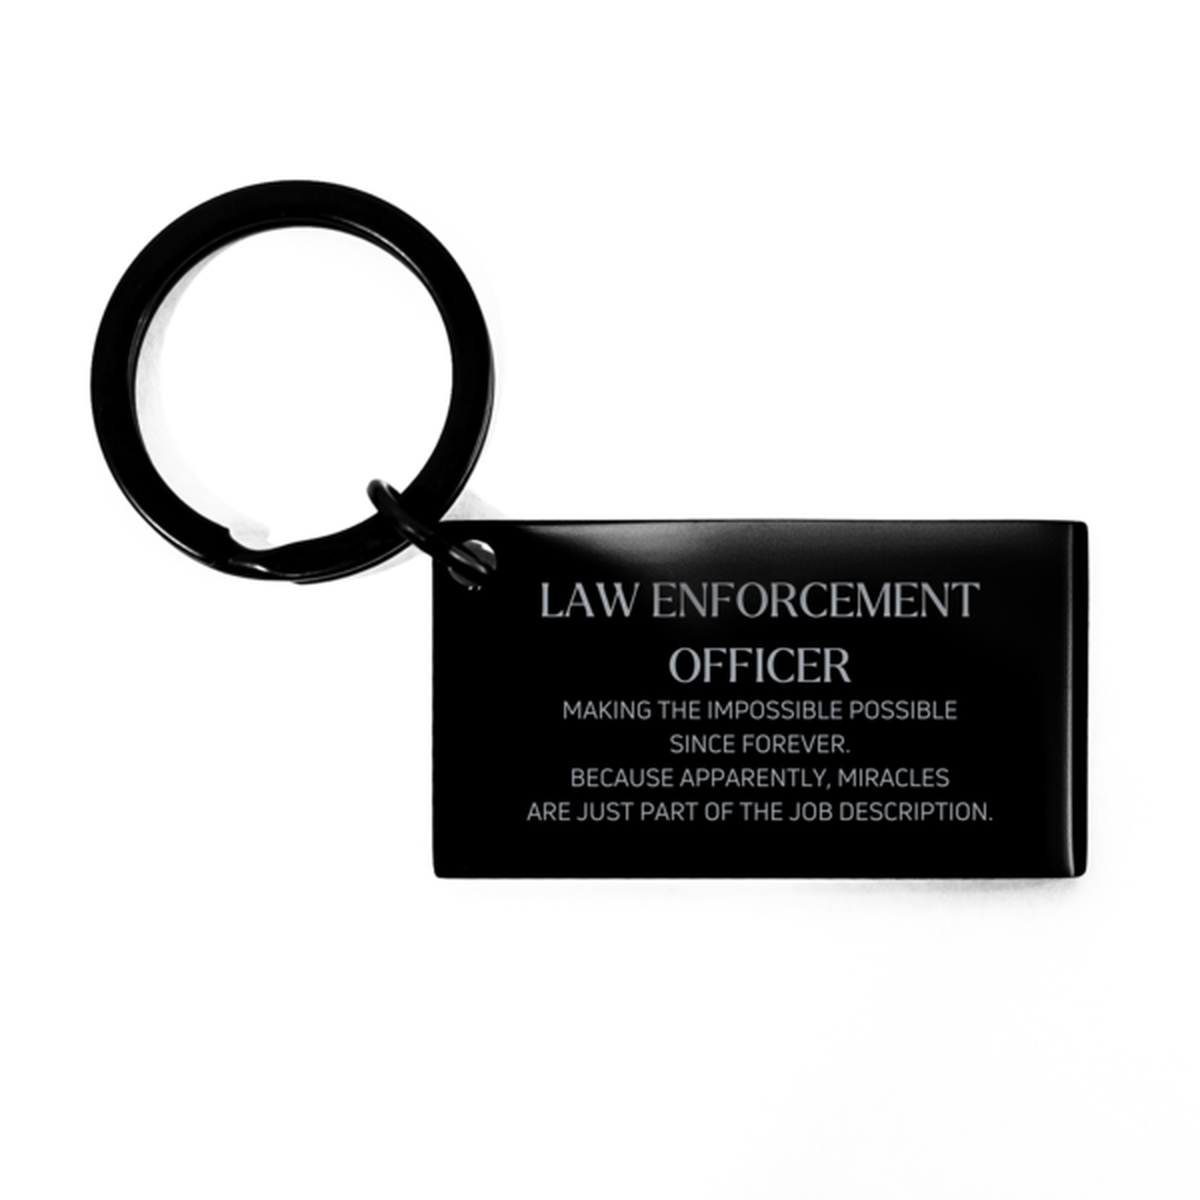 Funny Law Enforcement Officer Gifts, Miracles are just part of the job description, Inspirational Birthday Keychain For Law Enforcement Officer, Men, Women, Coworkers, Friends, Boss